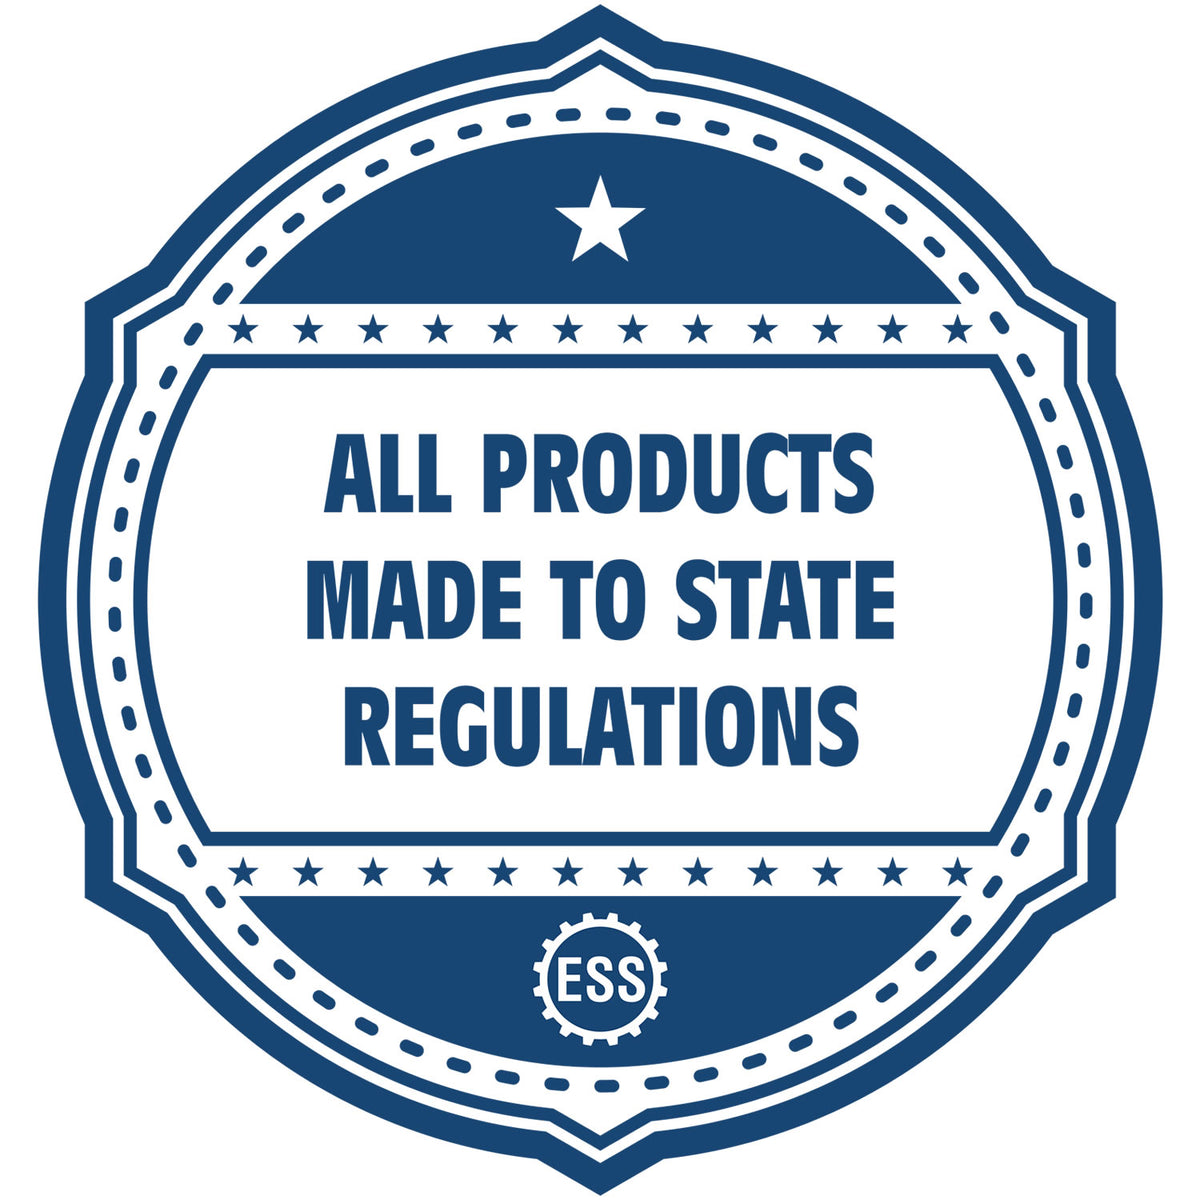 An icon or badge element for the State of Arizona Extended Long Reach Engineer Seal showing that this product is made in compliance with state regulations.